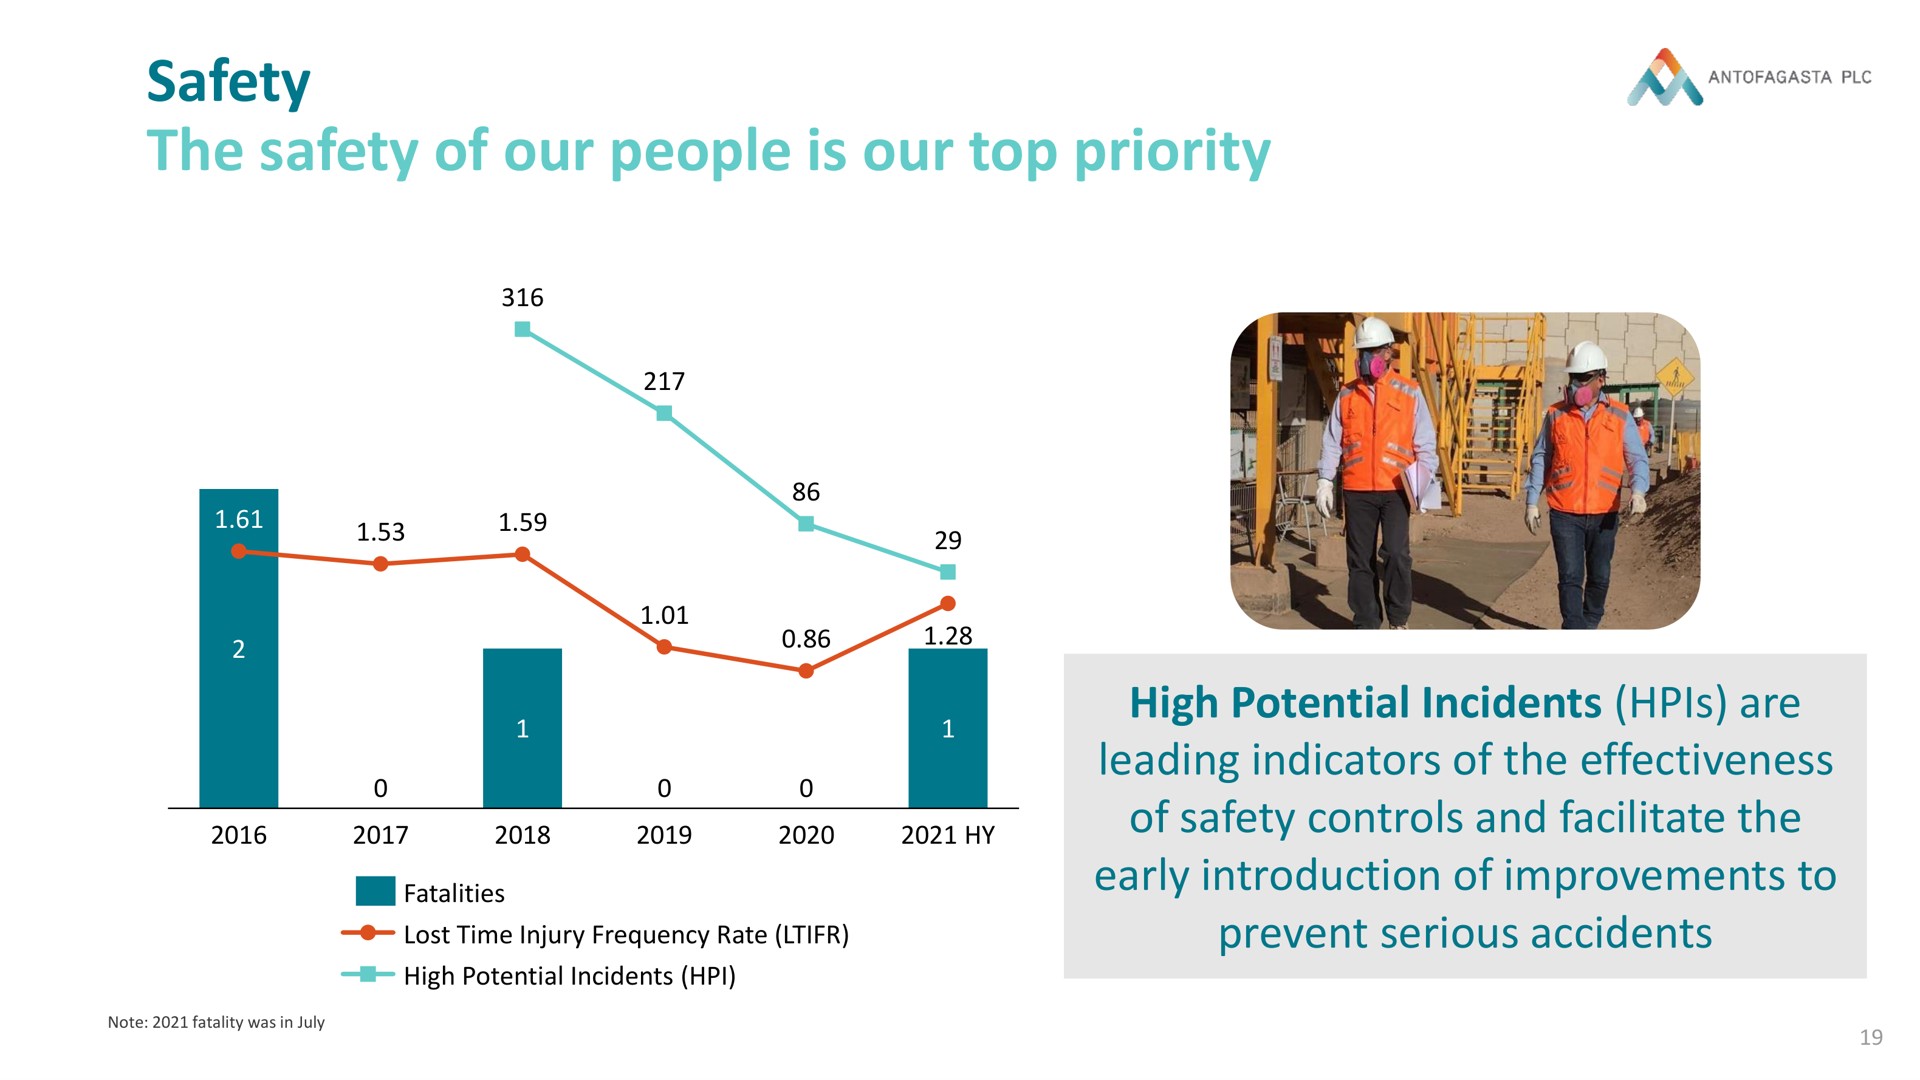 safety the safety of our people is our top priority odd dod high potential incidents are leading indicators effectiveness controls and facilitate early introduction improvements to | Antofagasta